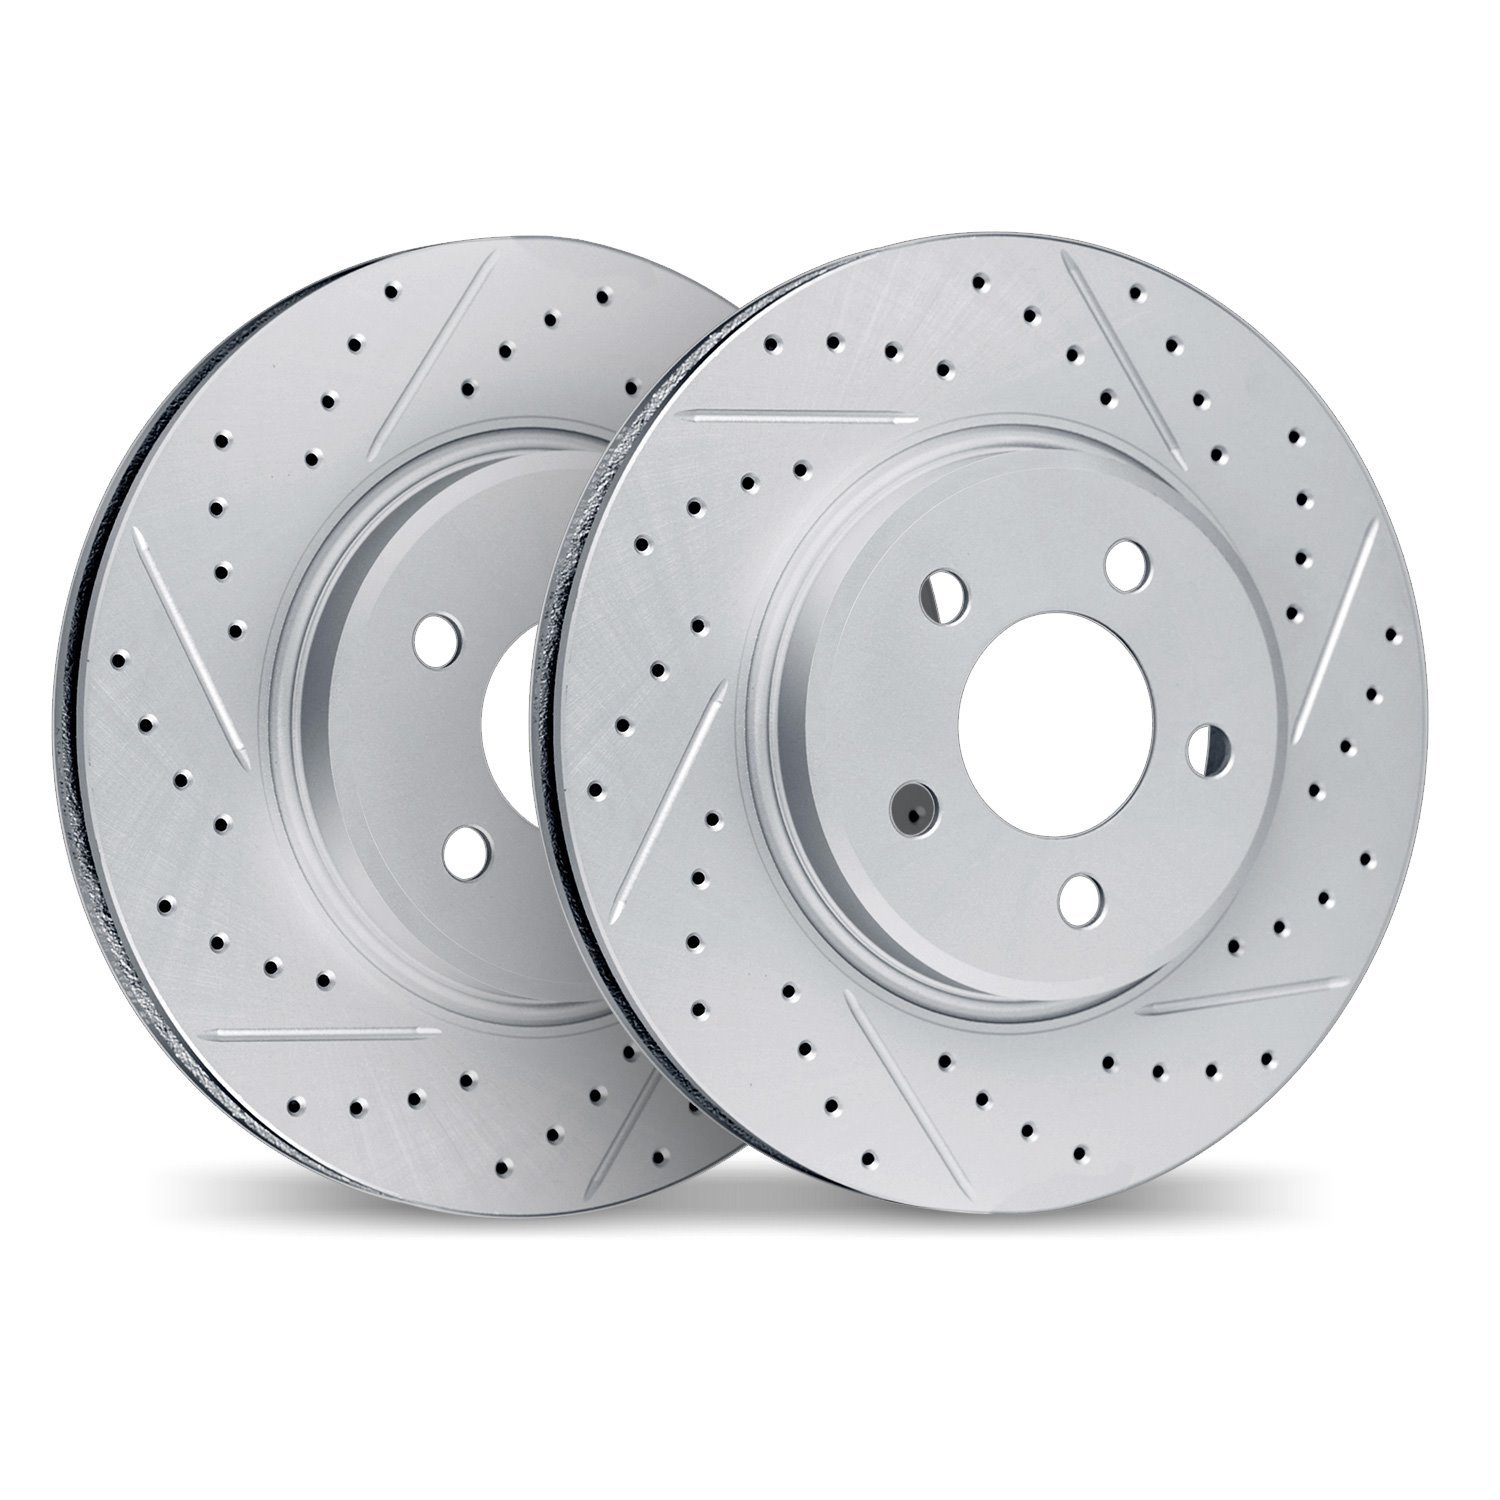 2002-80002 Geoperformance Drilled/Slotted Brake Rotors, 1993-2003 Ford/Lincoln/Mercury/Mazda, Position: Front